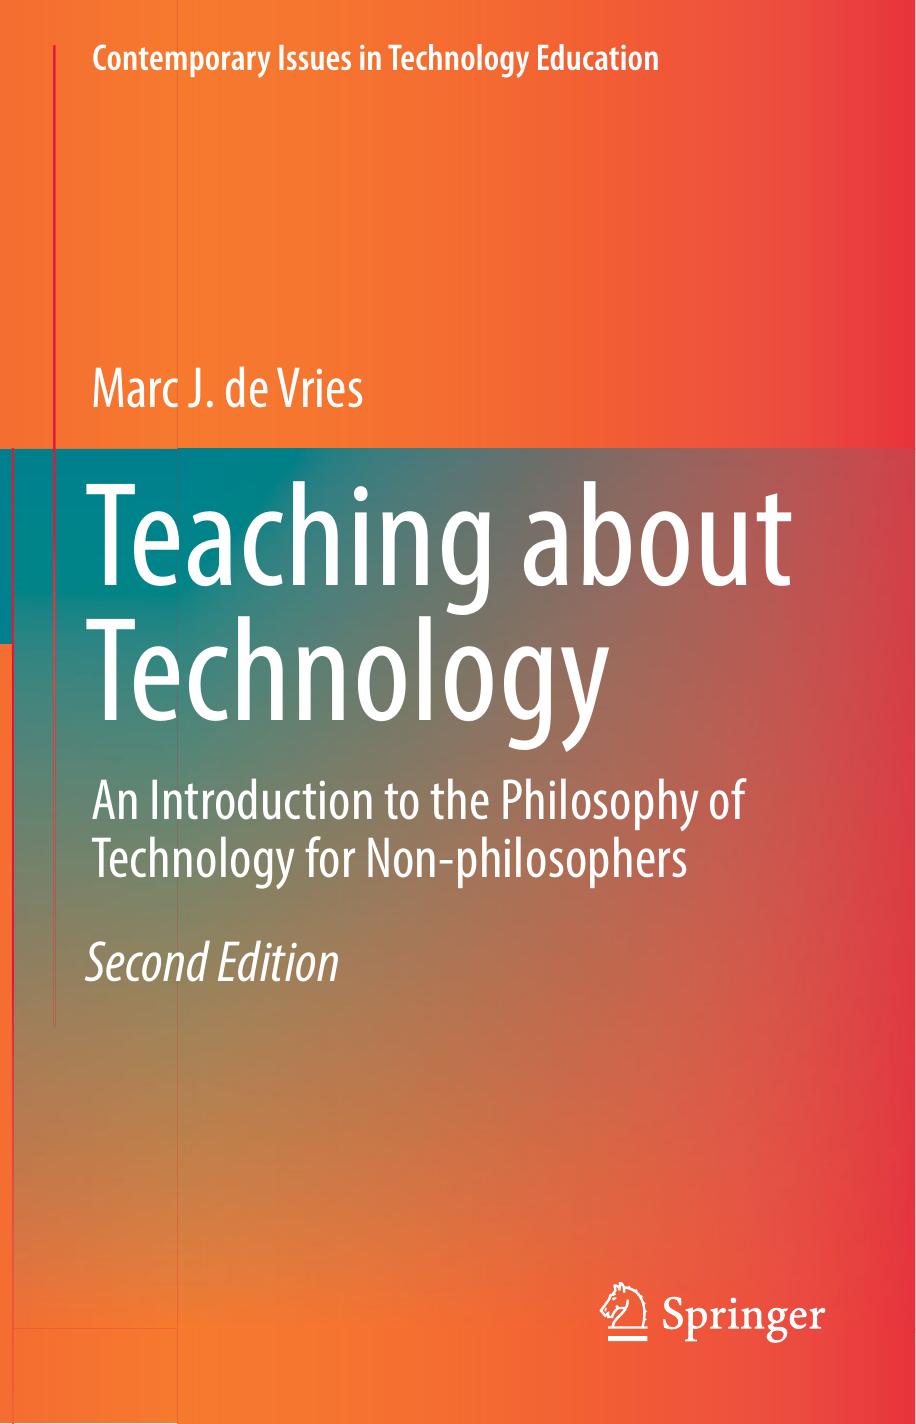 Teaching about Technology  An Introduction to the Philosophy of Technology for Non-philosophers, 2016